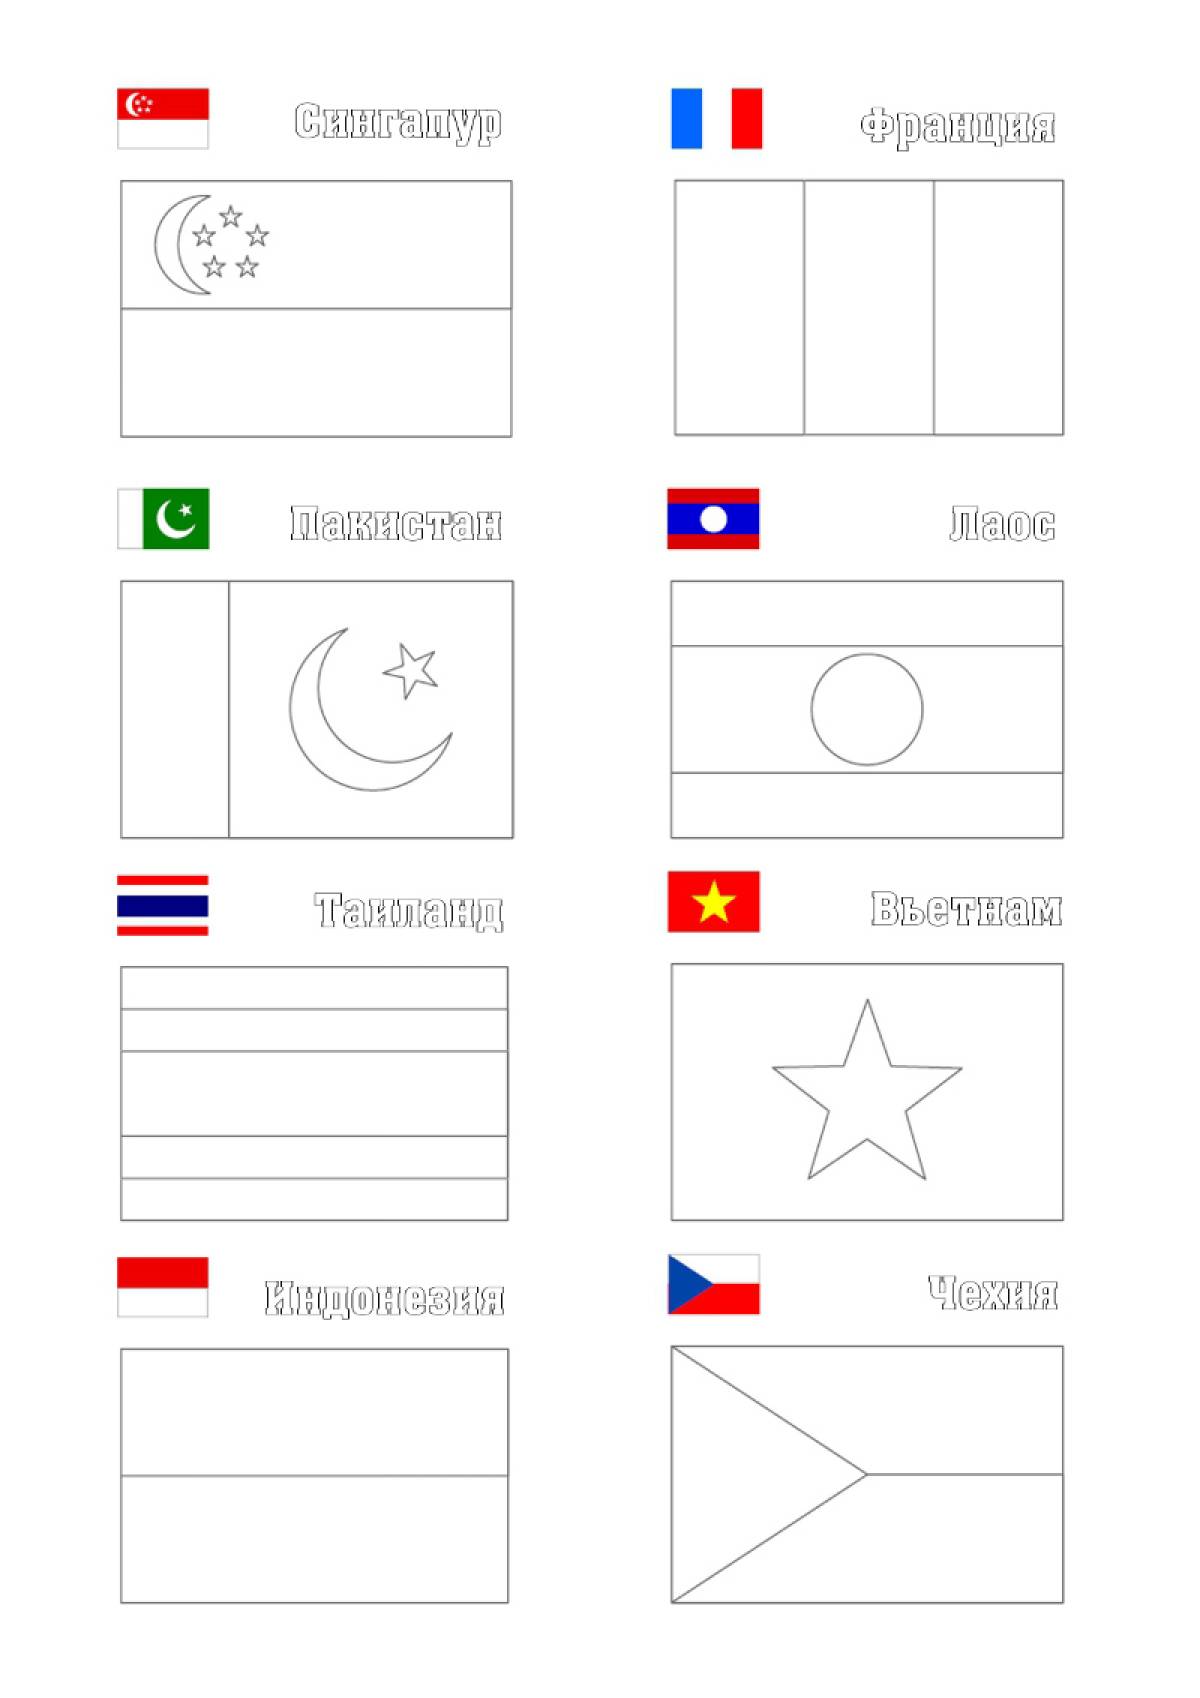 Flags of the world coloring pages